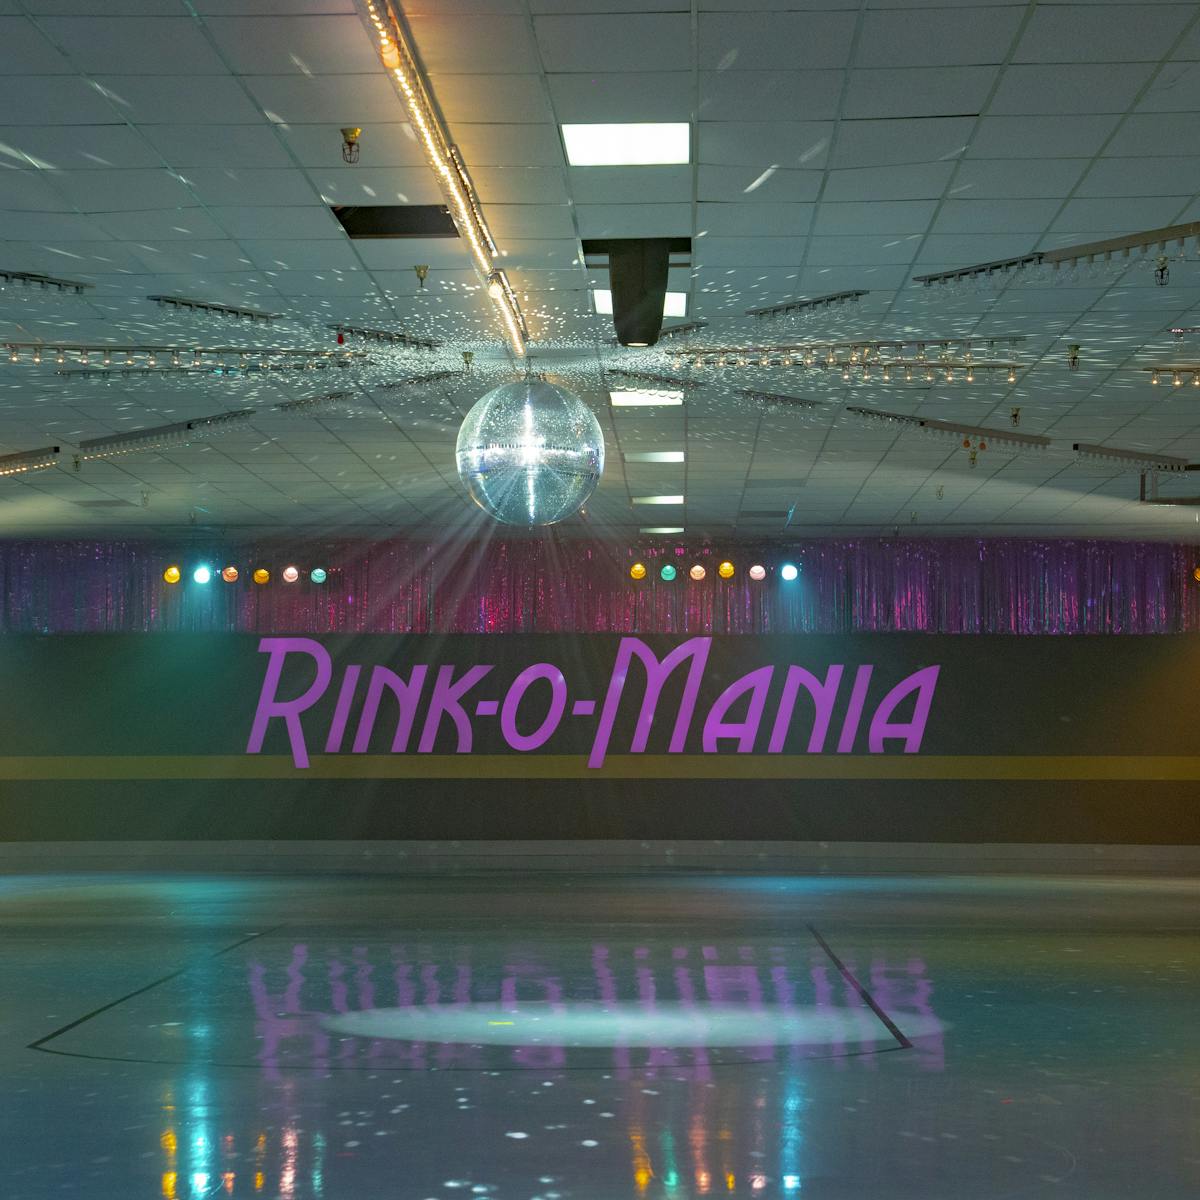 A neon-lit shot of Rink-o-Mania, complete with disco ball.